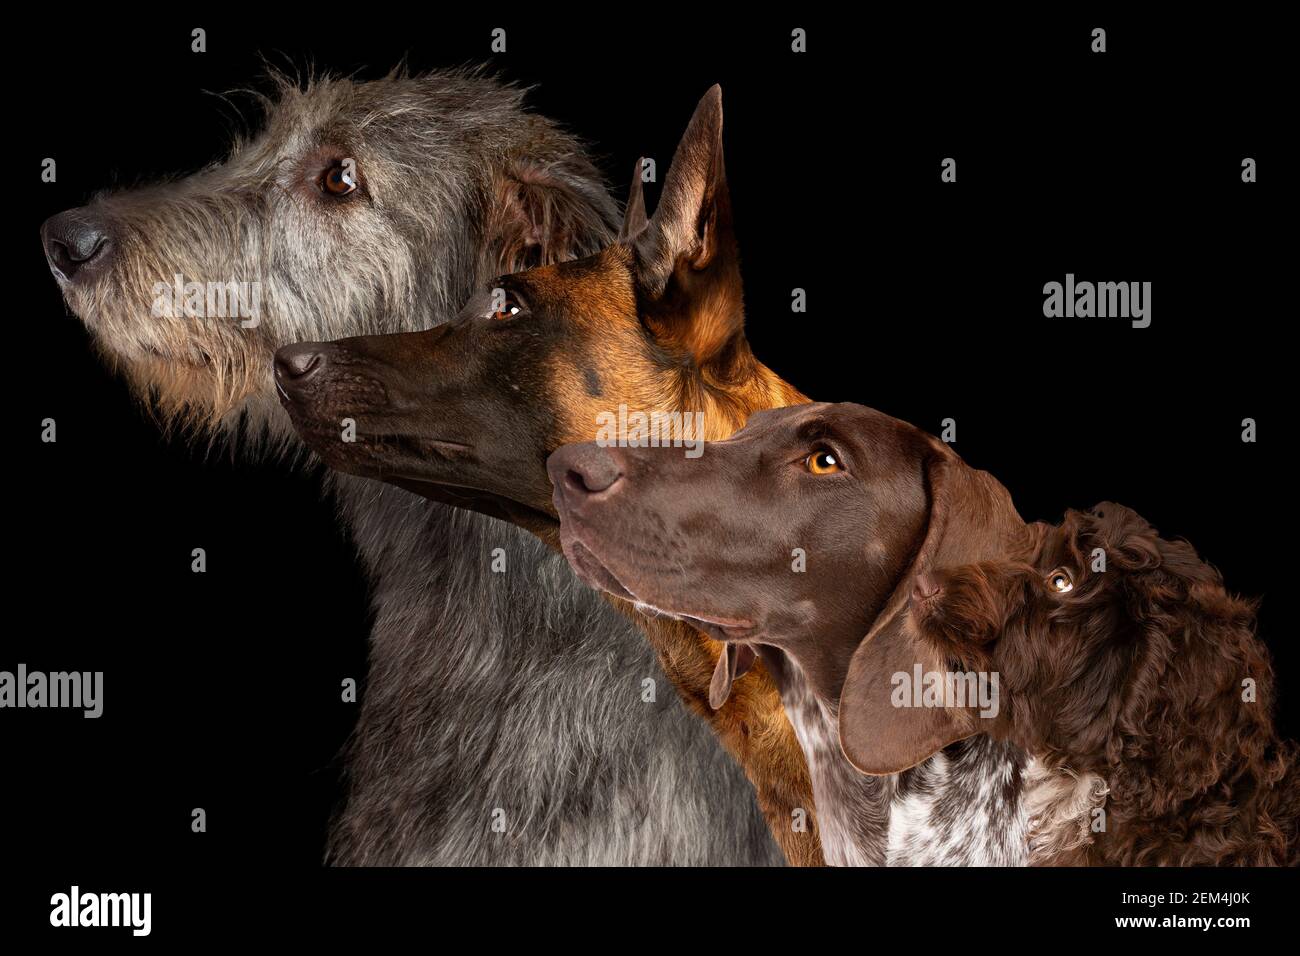 Group side view portrait of dog of different breeds against black background Stock Photo